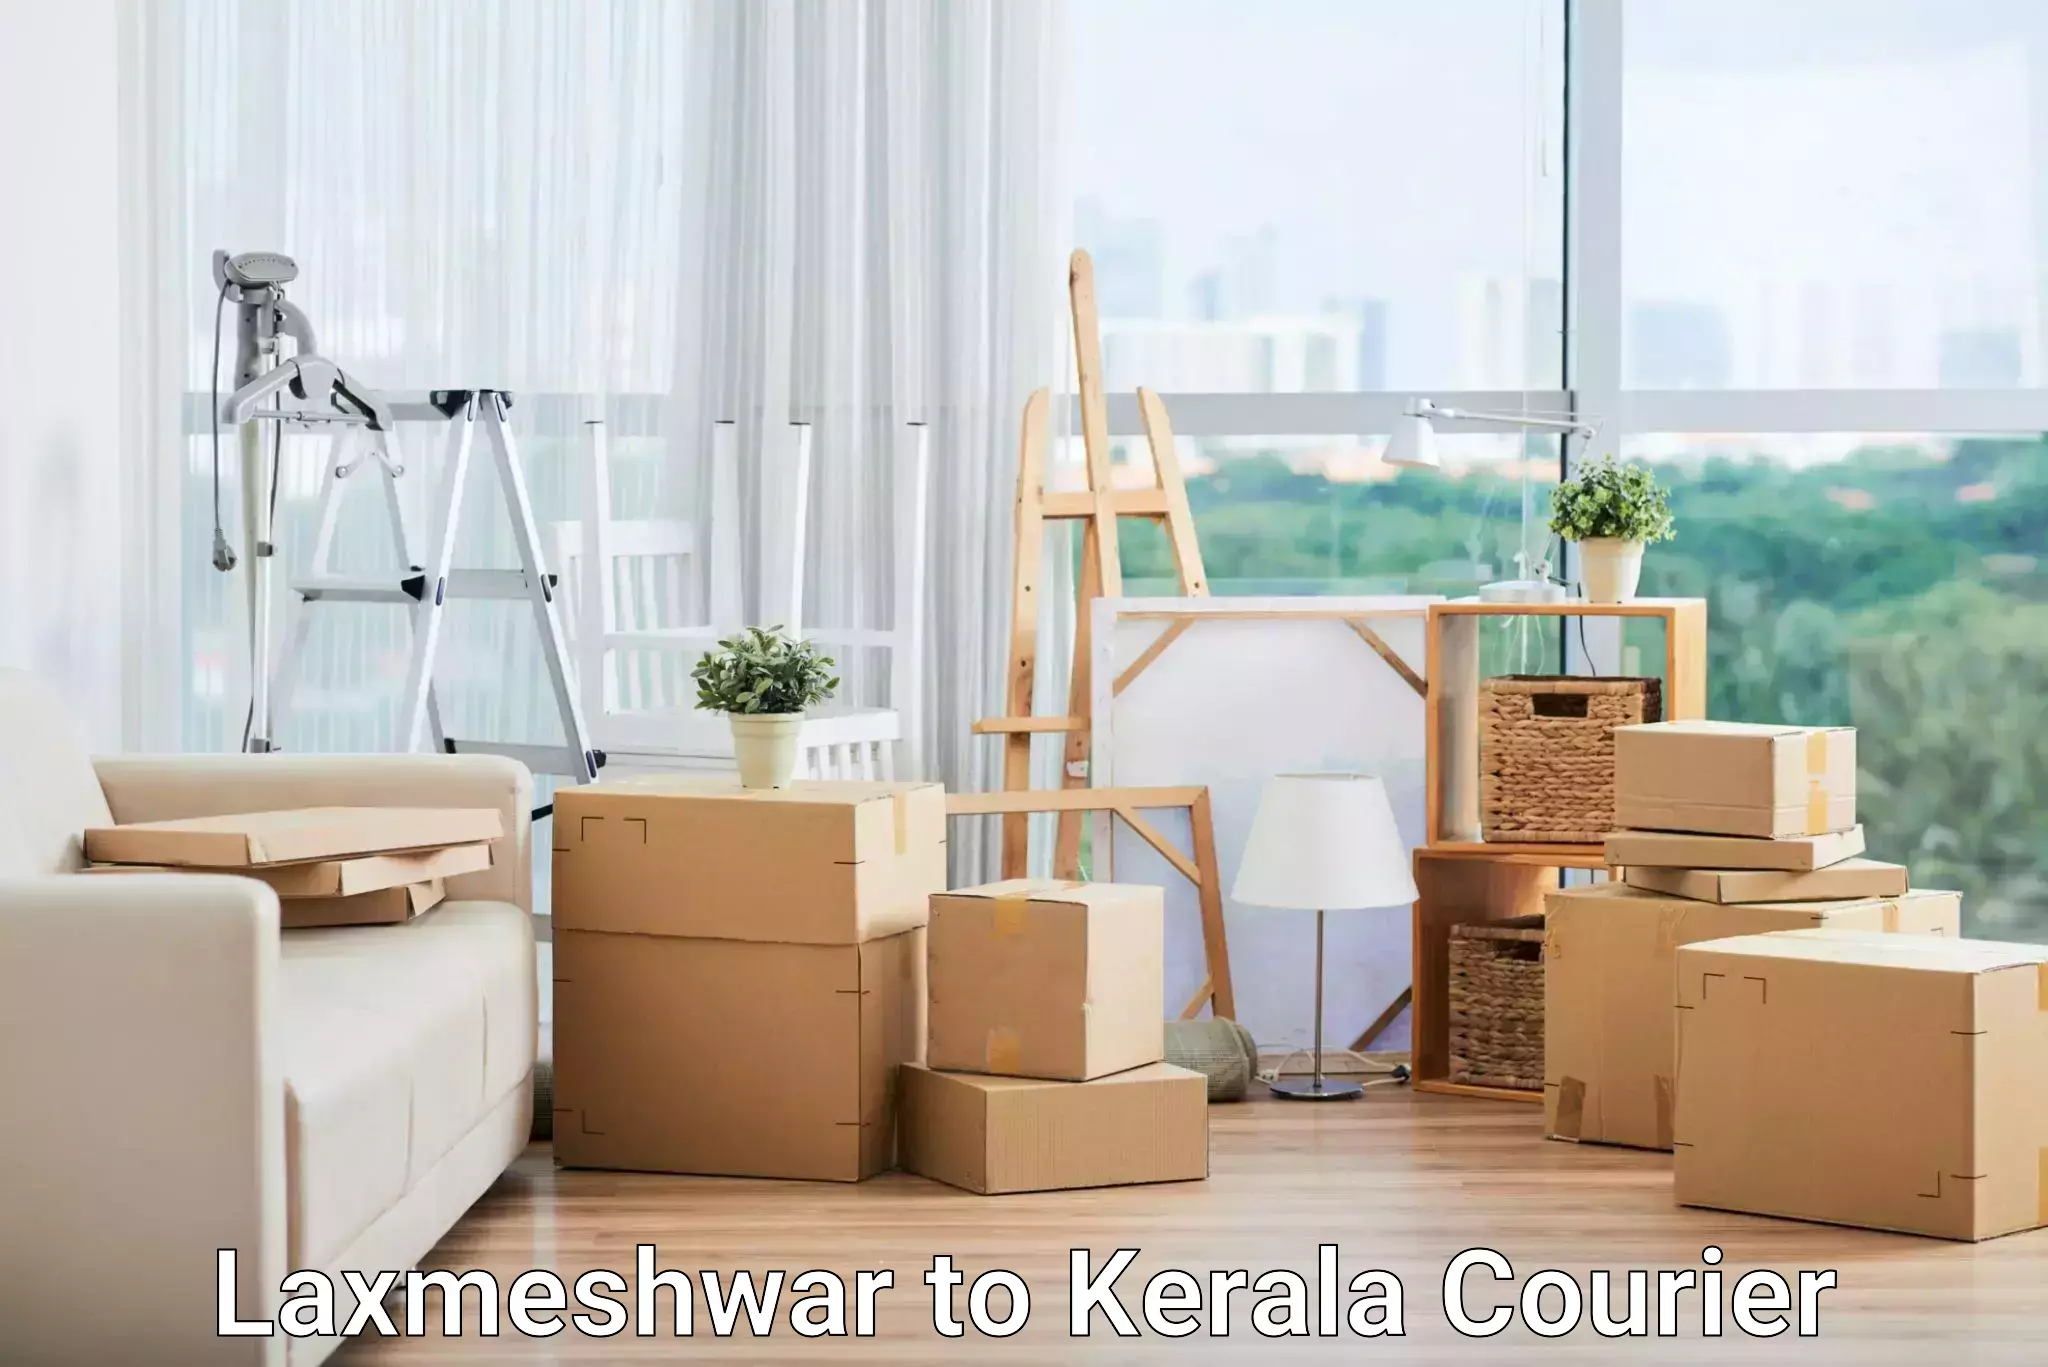 Domestic courier Laxmeshwar to Cochin University of Science and Technology